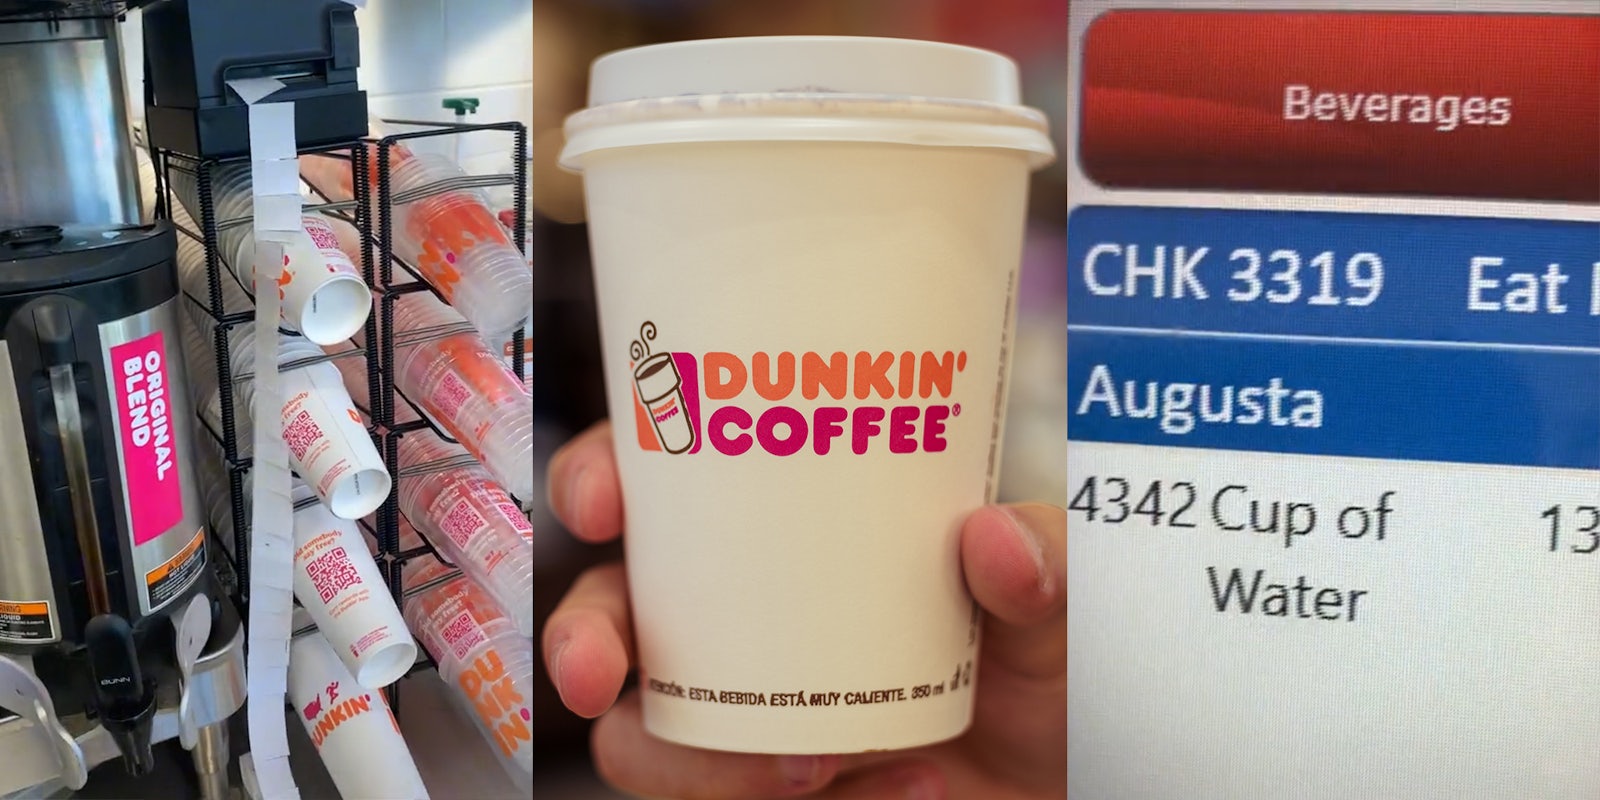 dunkin donuts cups and stickers (l) dunkin coffee cup (c) order screen with '4342 Cup of Water' (r)